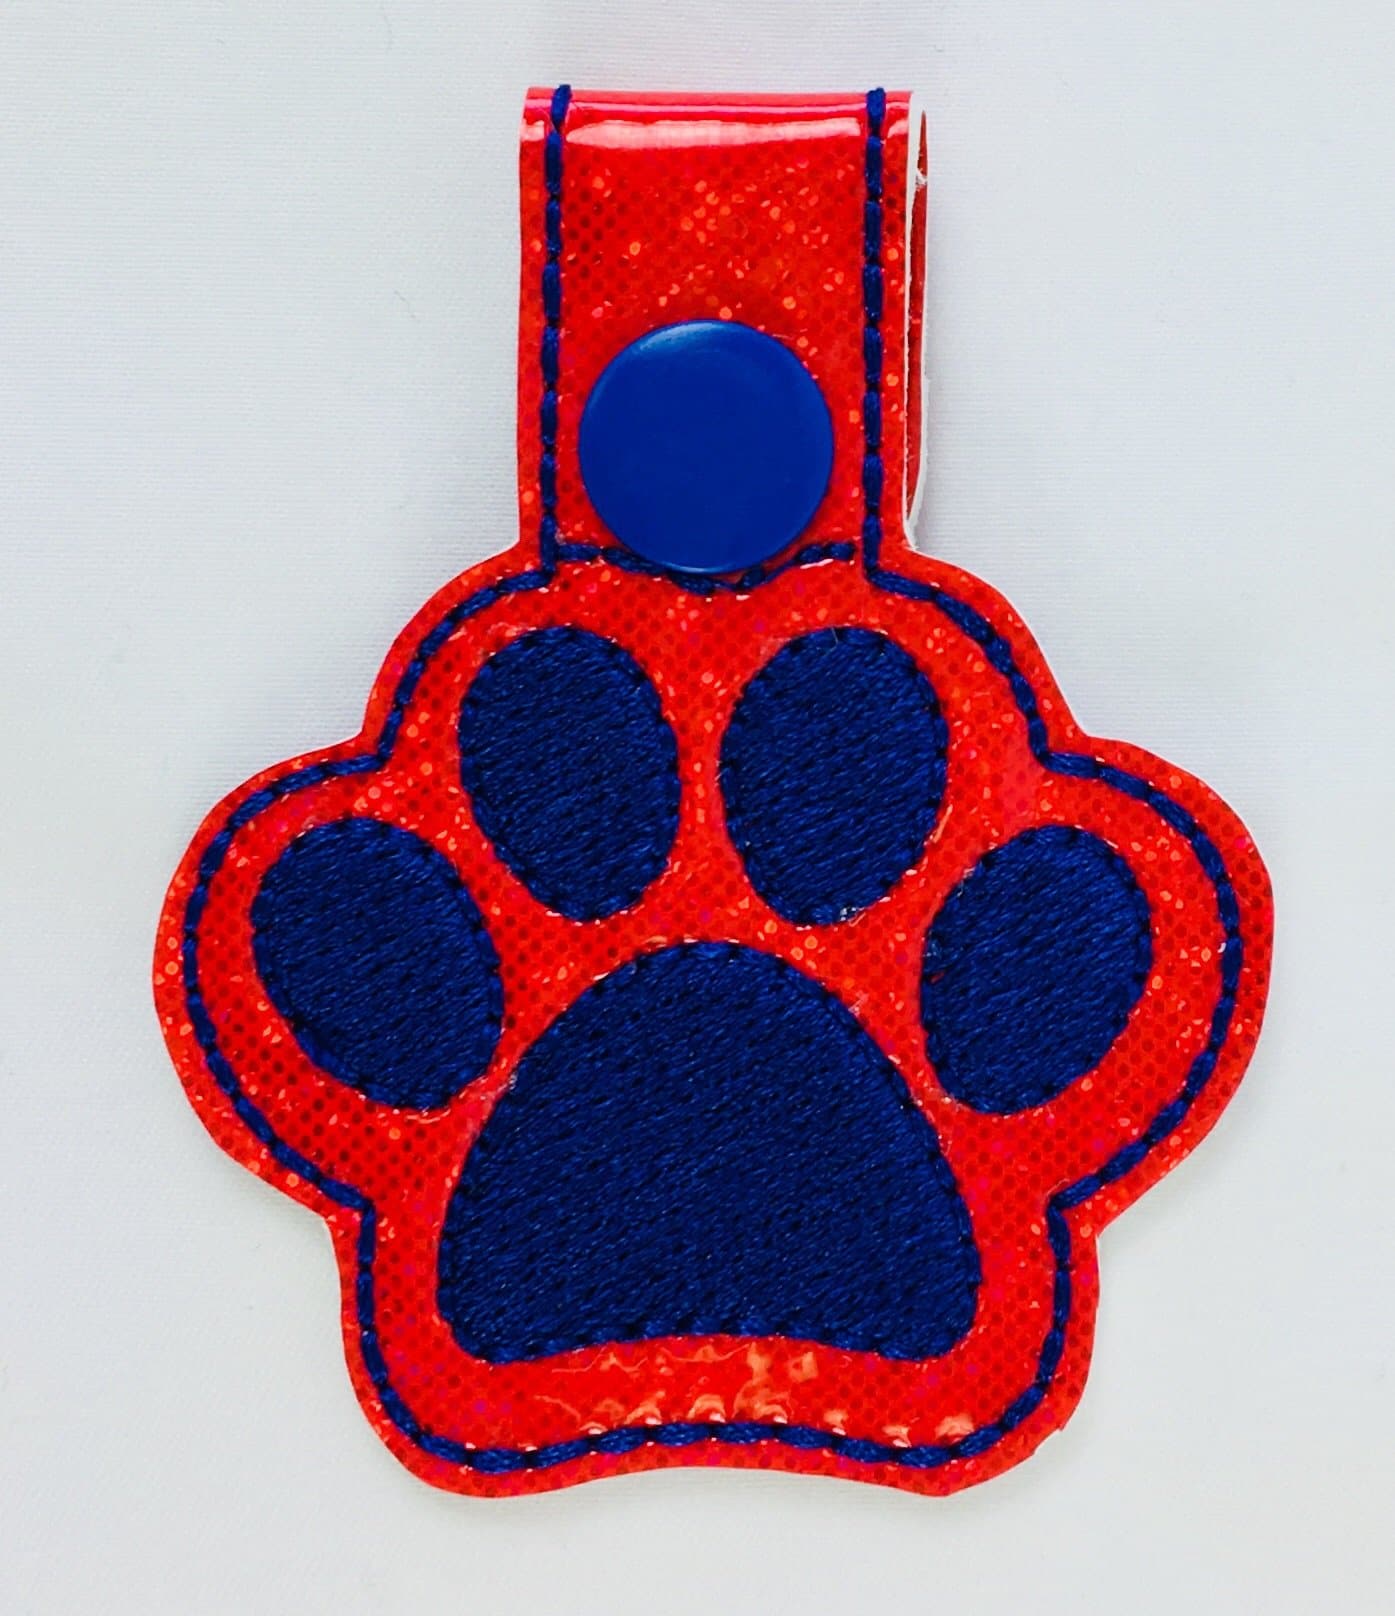 sparkle red and navy blue Paw Print Keychain Fob